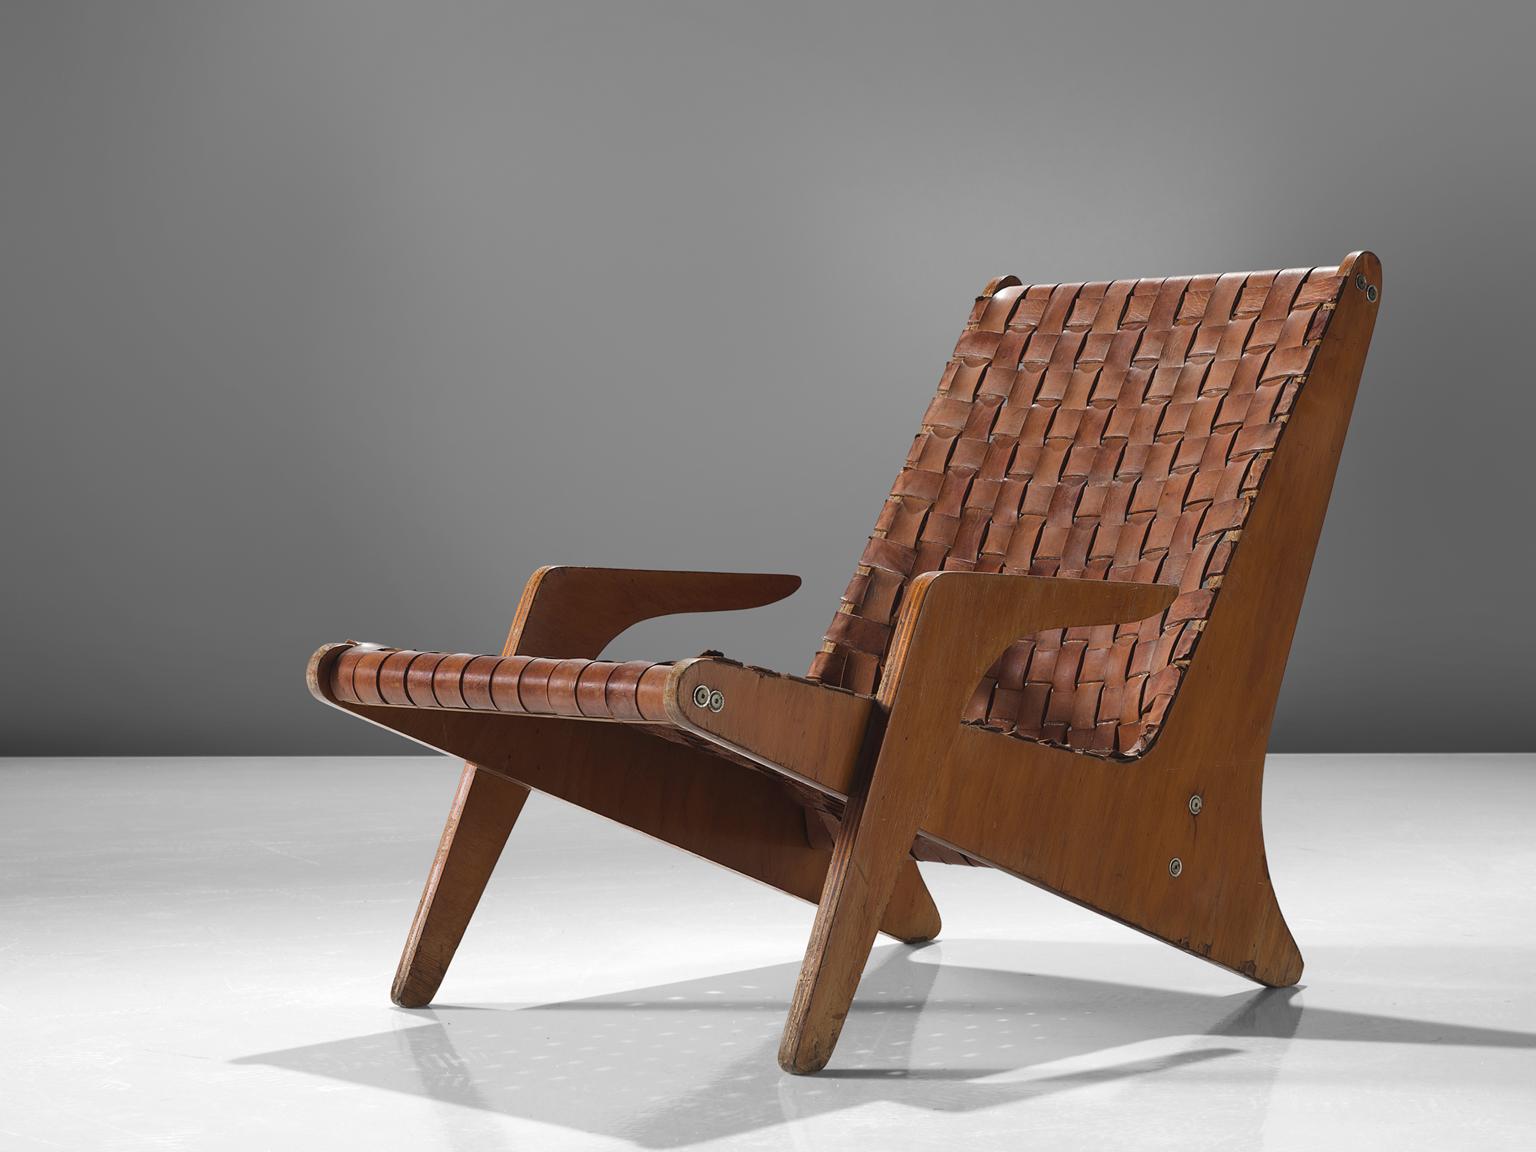 Zanine Caldas, Espreguicadeira, plywood and cognac leather, Brazil, 1949.

This sculptural lounge chair is designed by Zanine Caldas. The chair is made out of 20mm thick plywood and cognac leather seat. The chair is one of Caldas' classics with